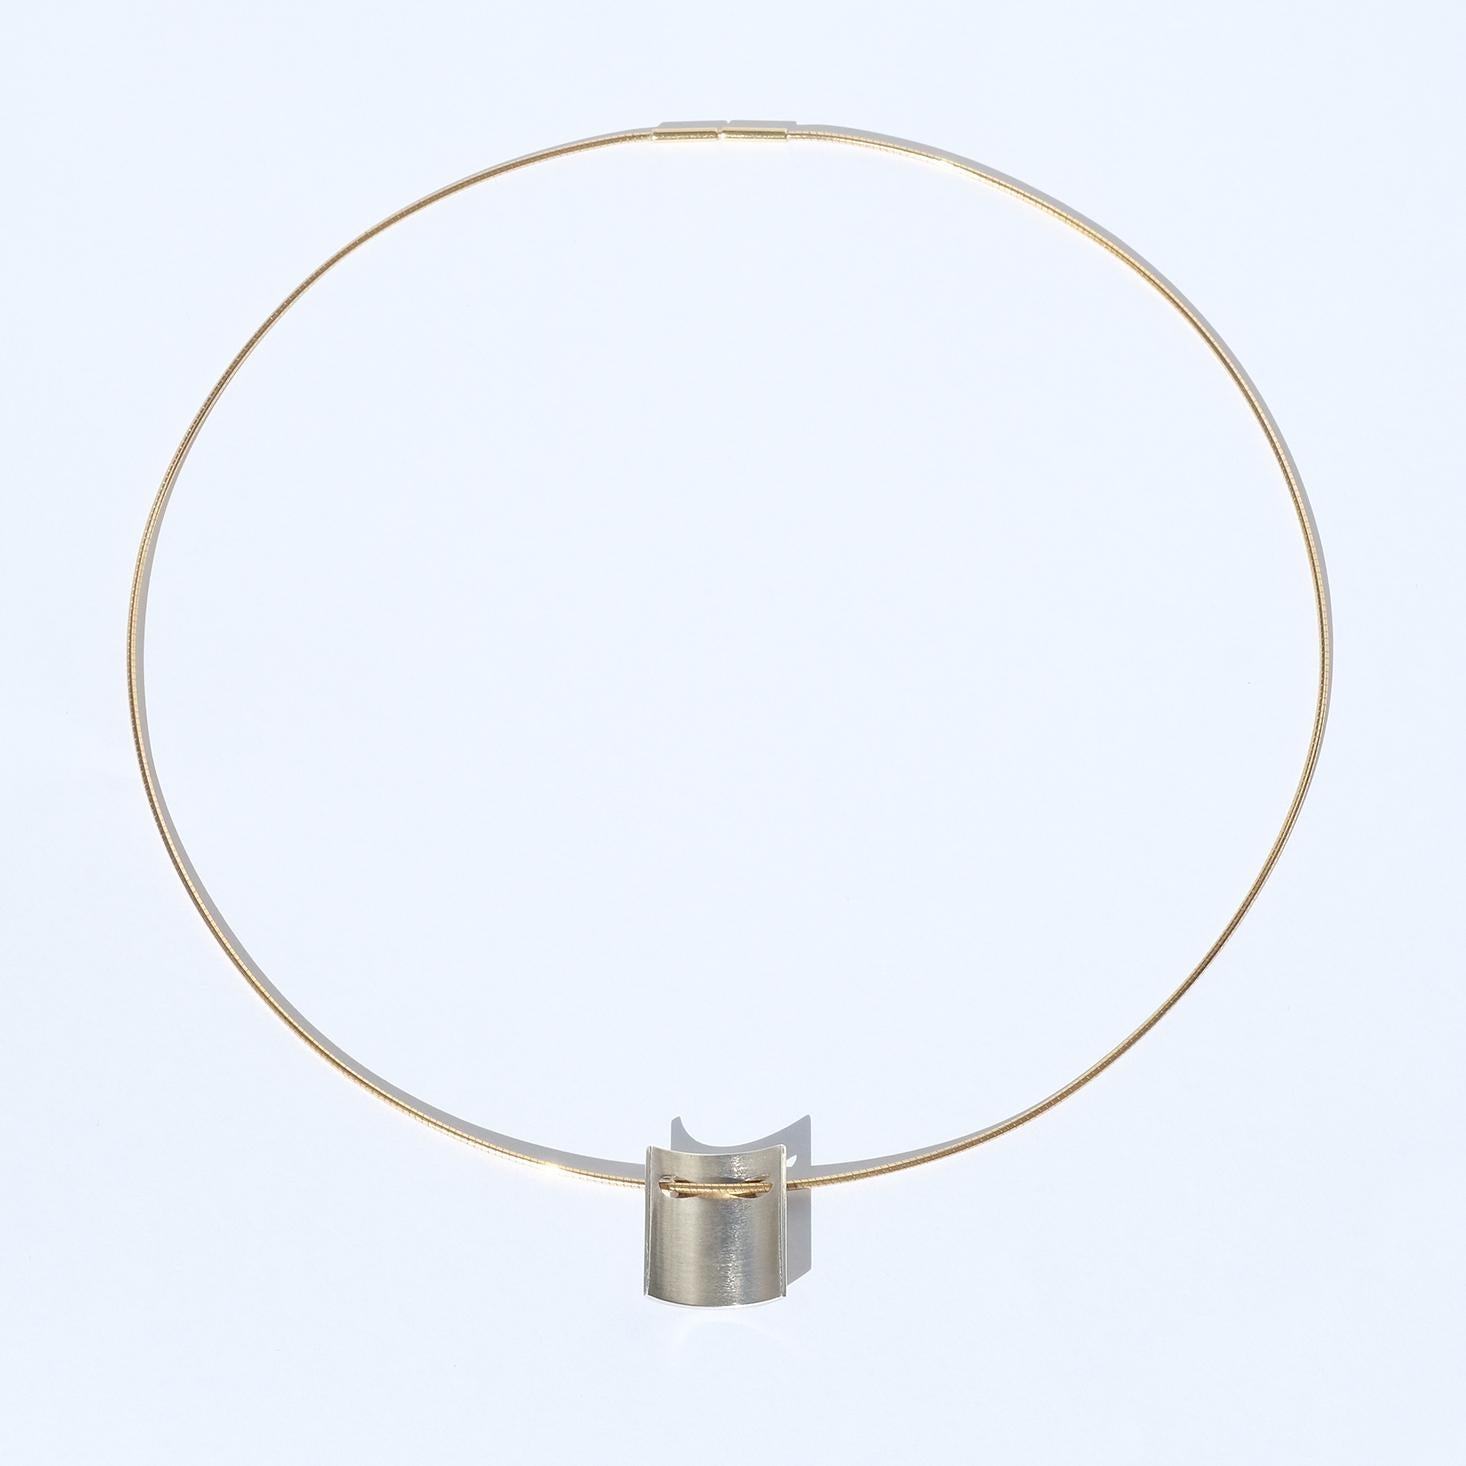 This necklace has a mixture of matt sterling silver and 14 karat shiny gold. The design can be described as timeless and elegant simple. The necklace is perfect for both dinner parties and everyday use.
chain lt. 45 cm, pendant ht. 20 mm, wt. 10 gm